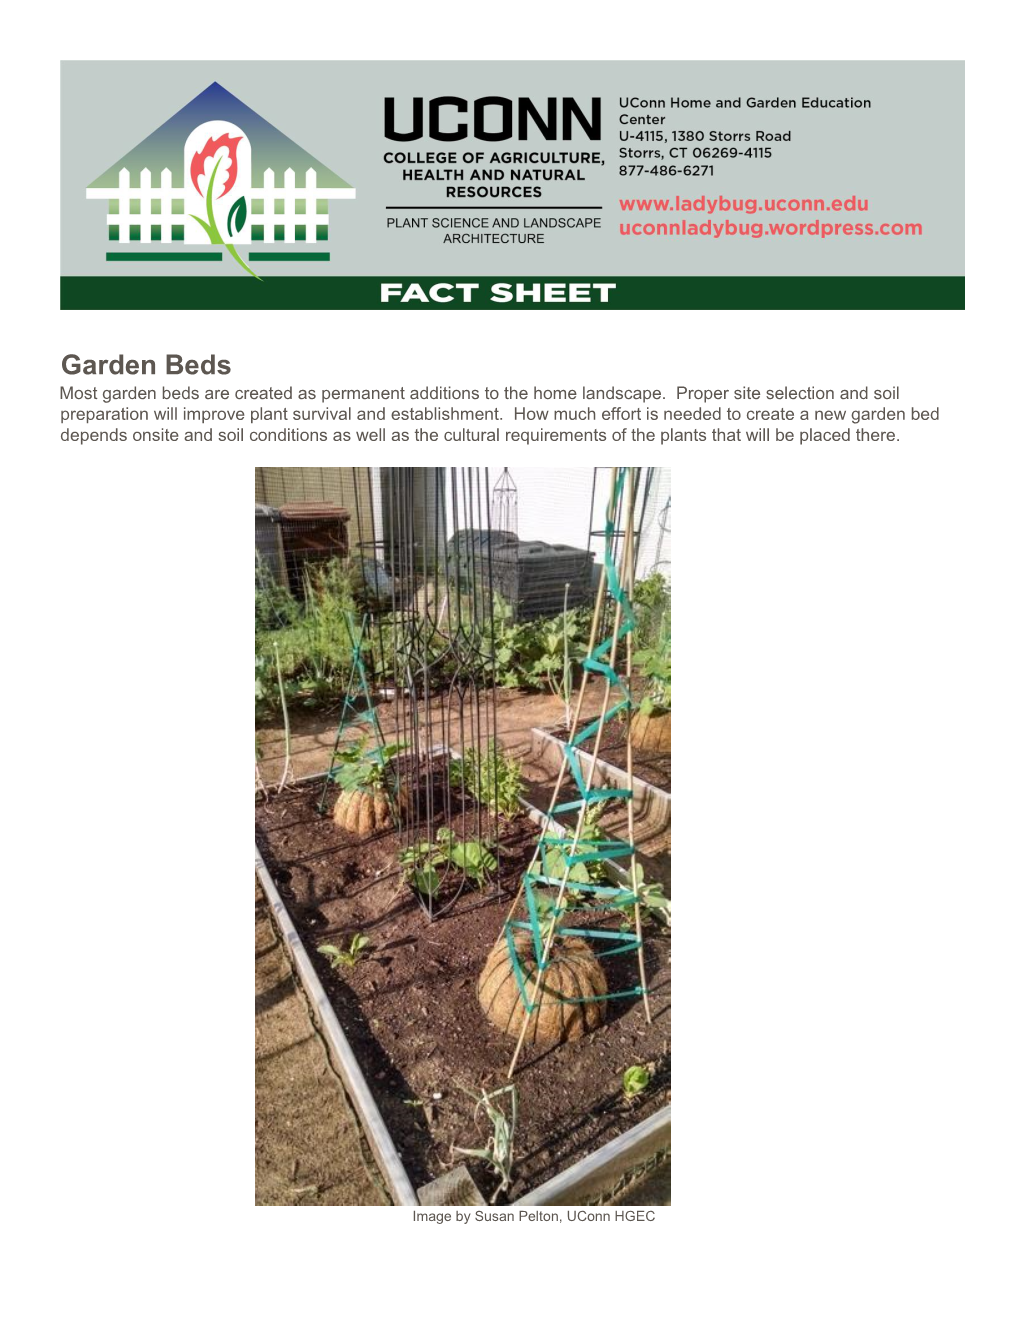 Garden Beds Most Garden Beds Are Created As Permanent Additions to the Home Landscape